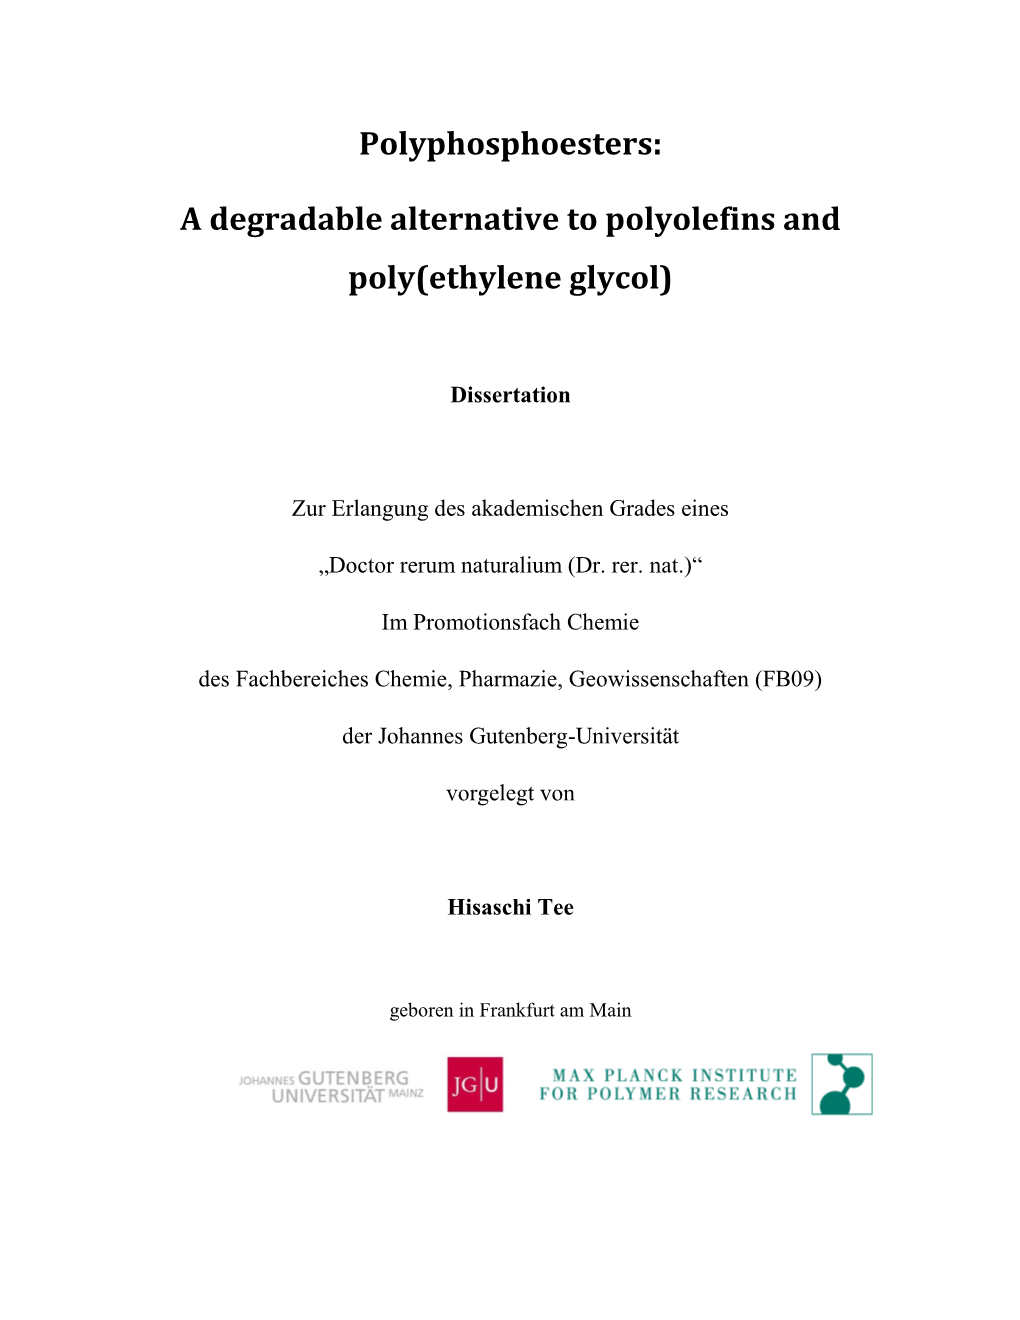 Polyphosphoesters: a Degradable Alternative to Polyolefins and Poly(Ethylene Glycol)